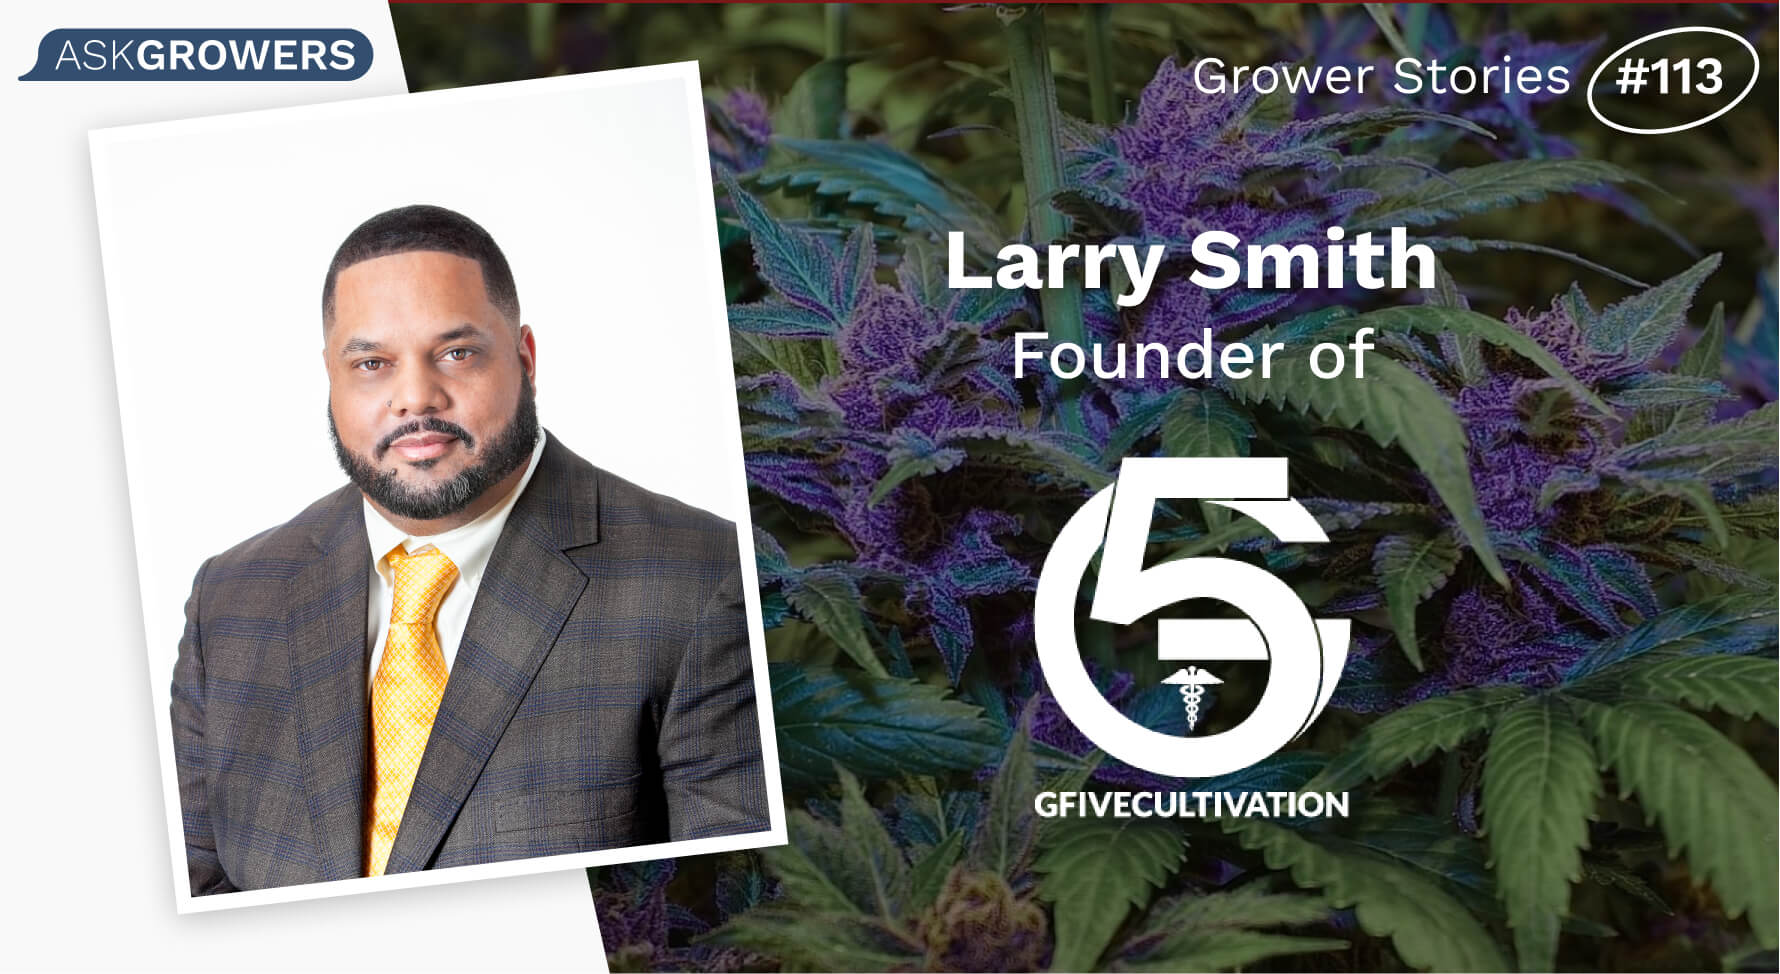 Grower Stories #113: Larry Smith